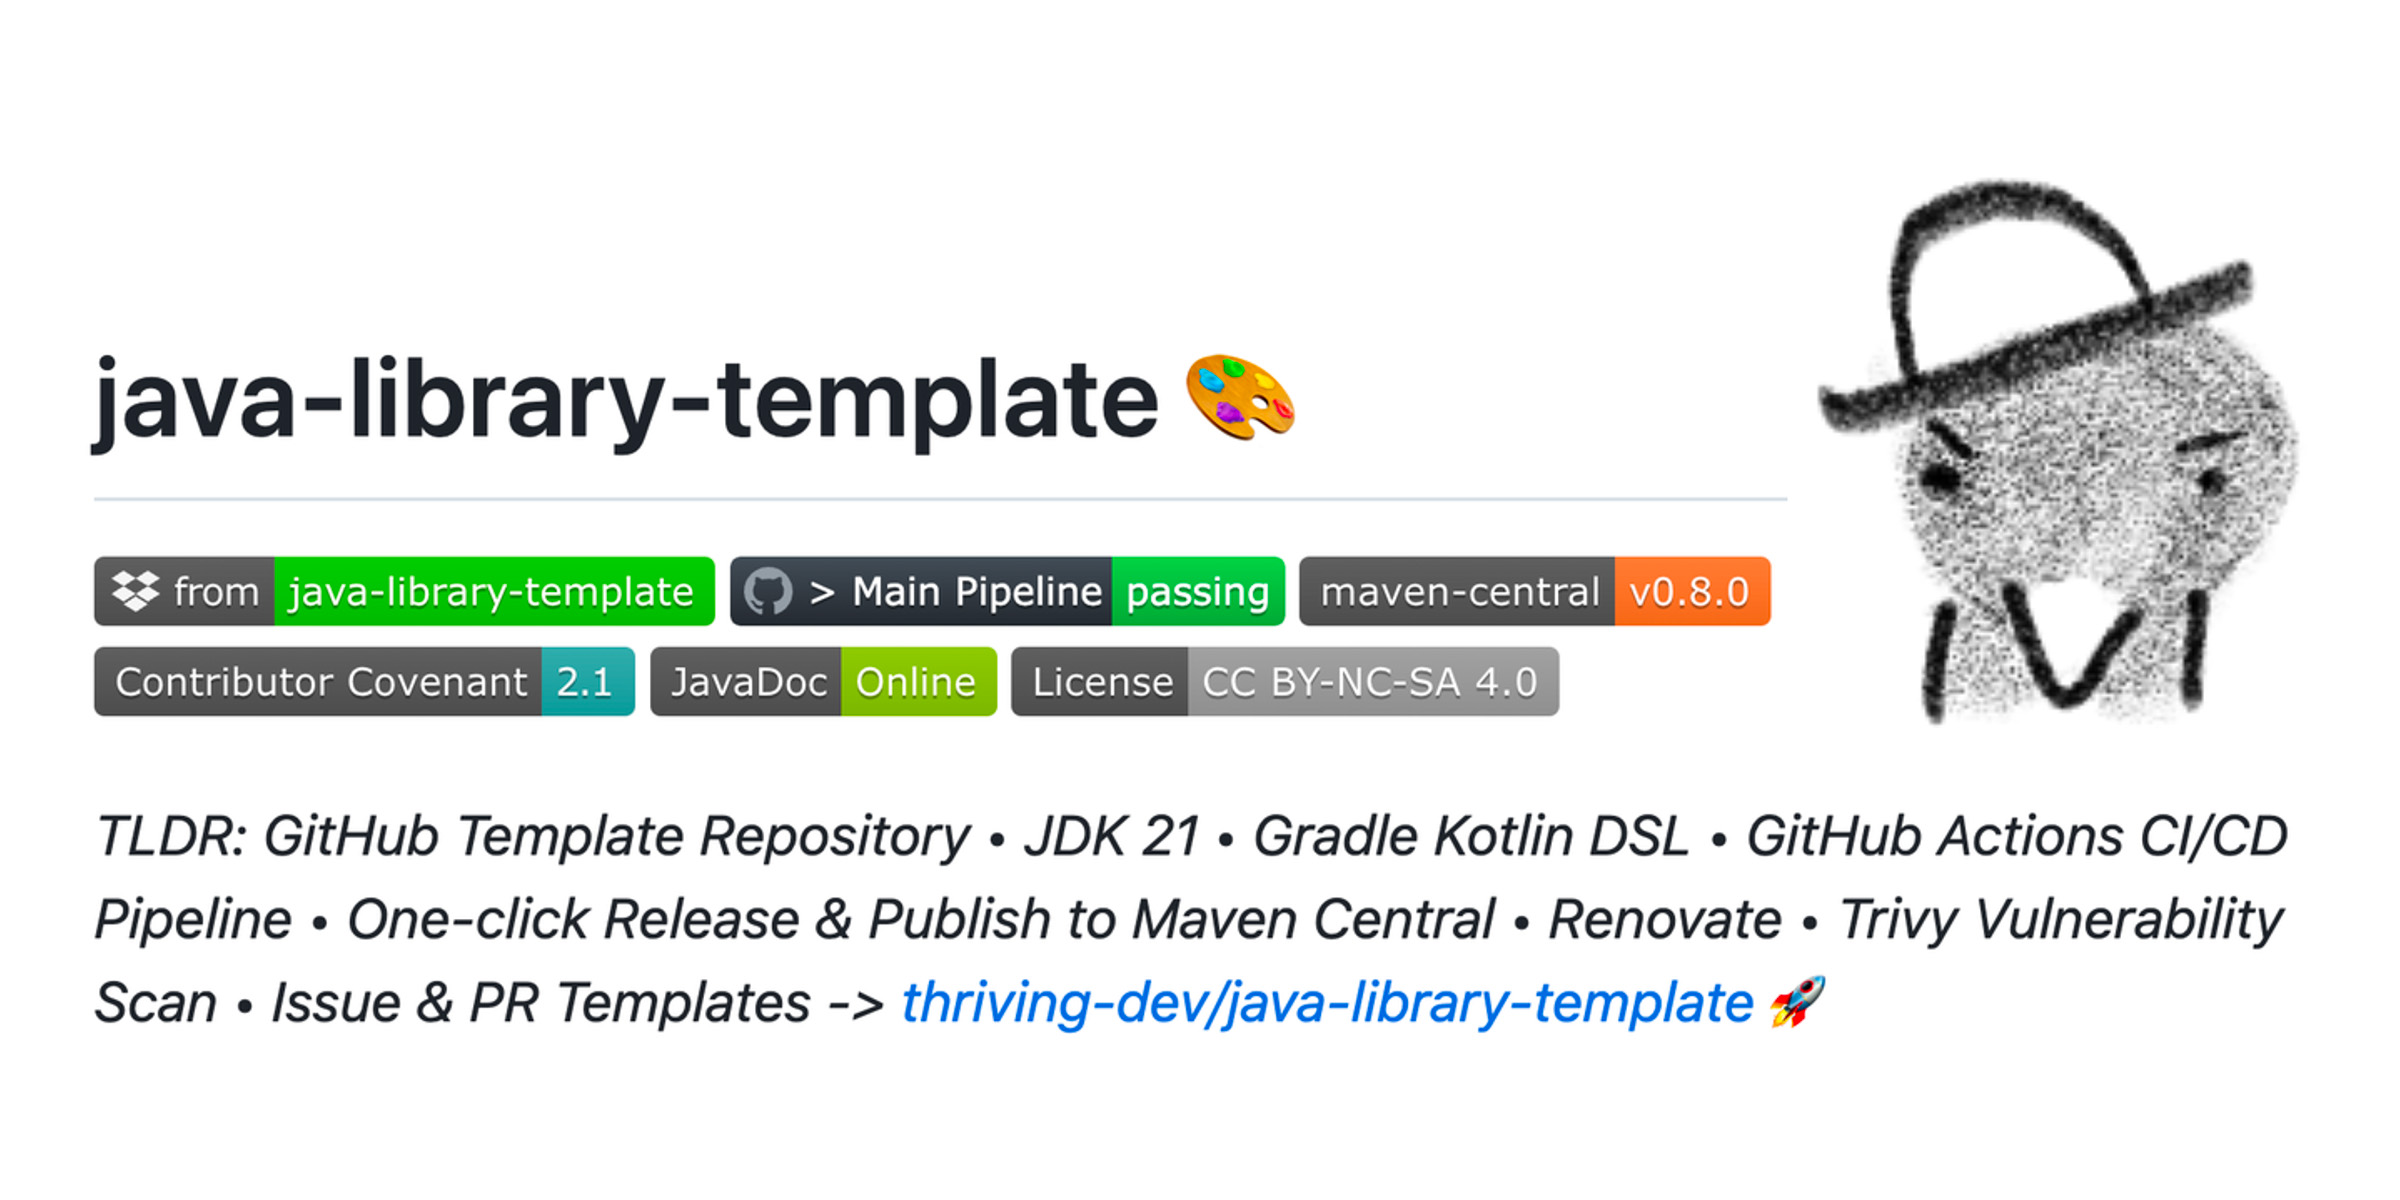 TLDR: GitHub Template Repository • Gradle Kotlin DSL • GitHub Actions CI/CD Pipeline • One-click Release & Publish to Maven Central • Reno